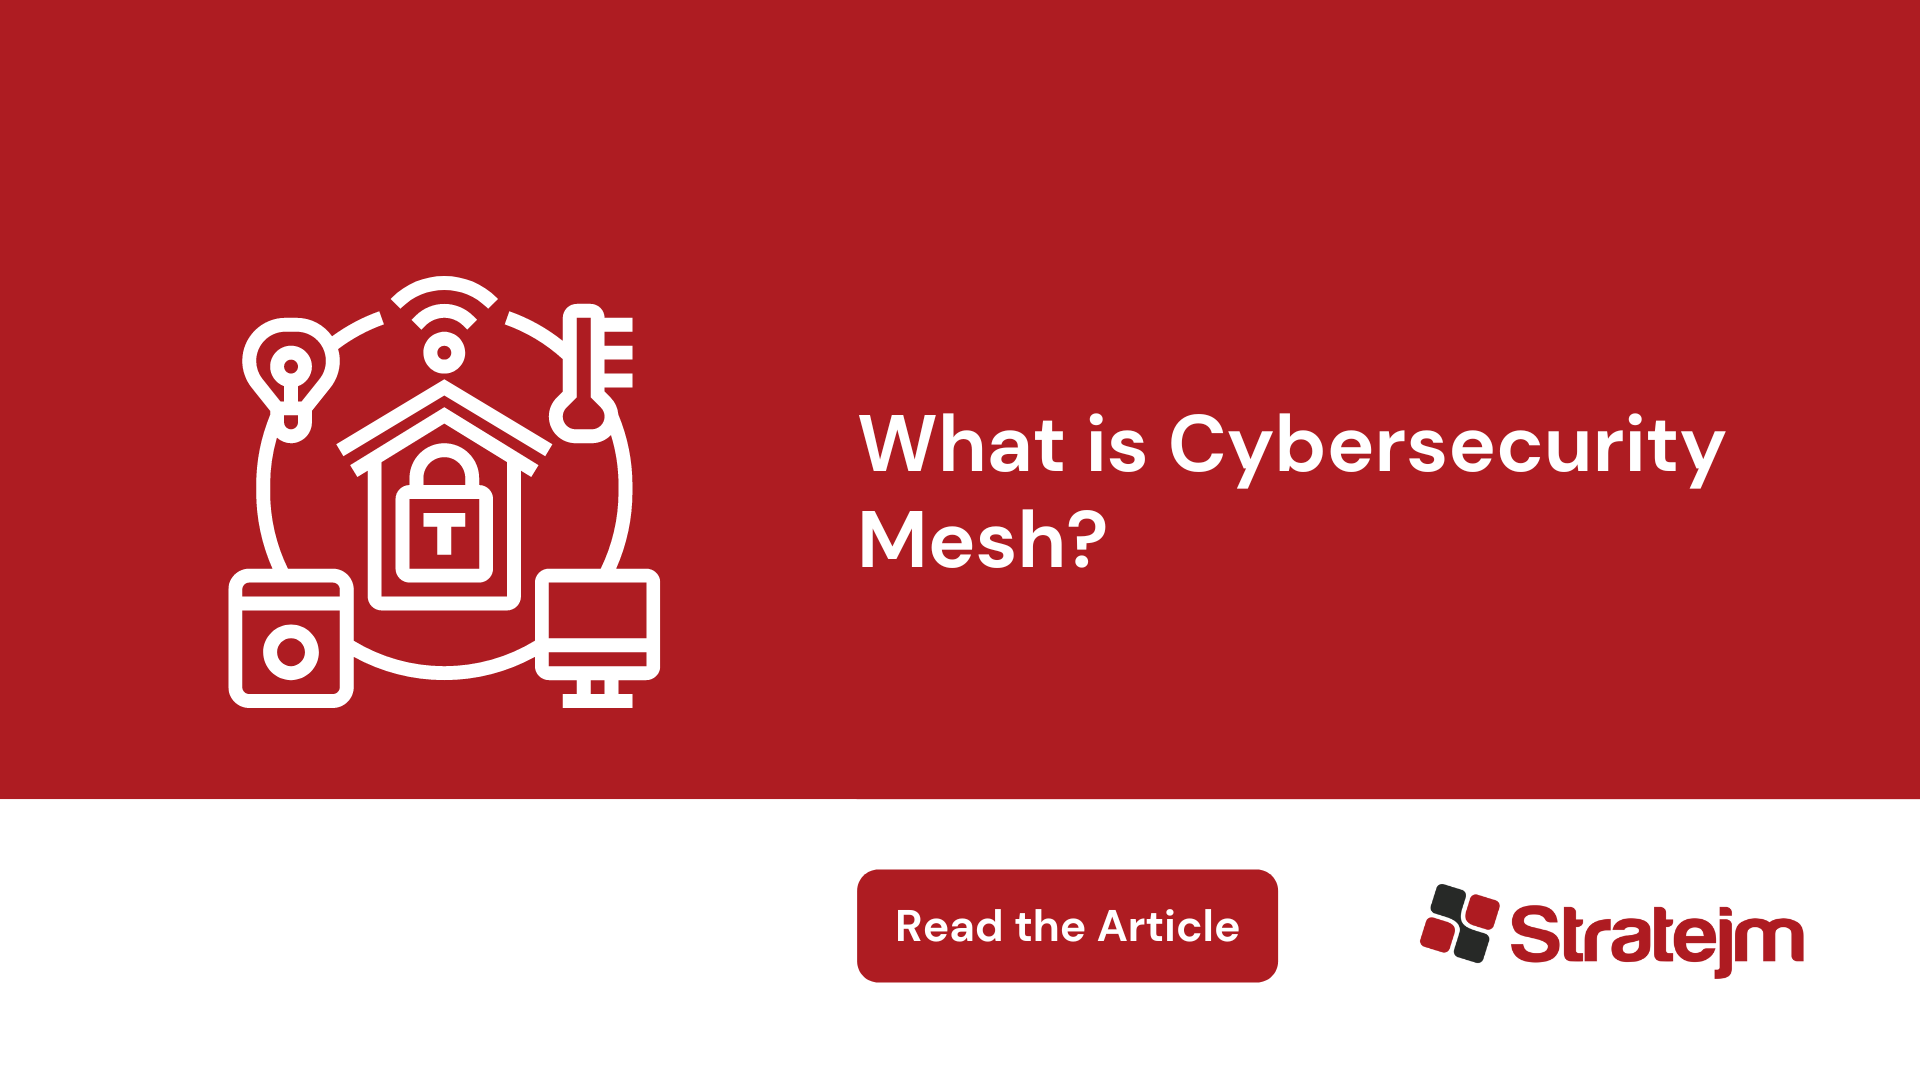 Cybersecurity Mesh Quick Guide